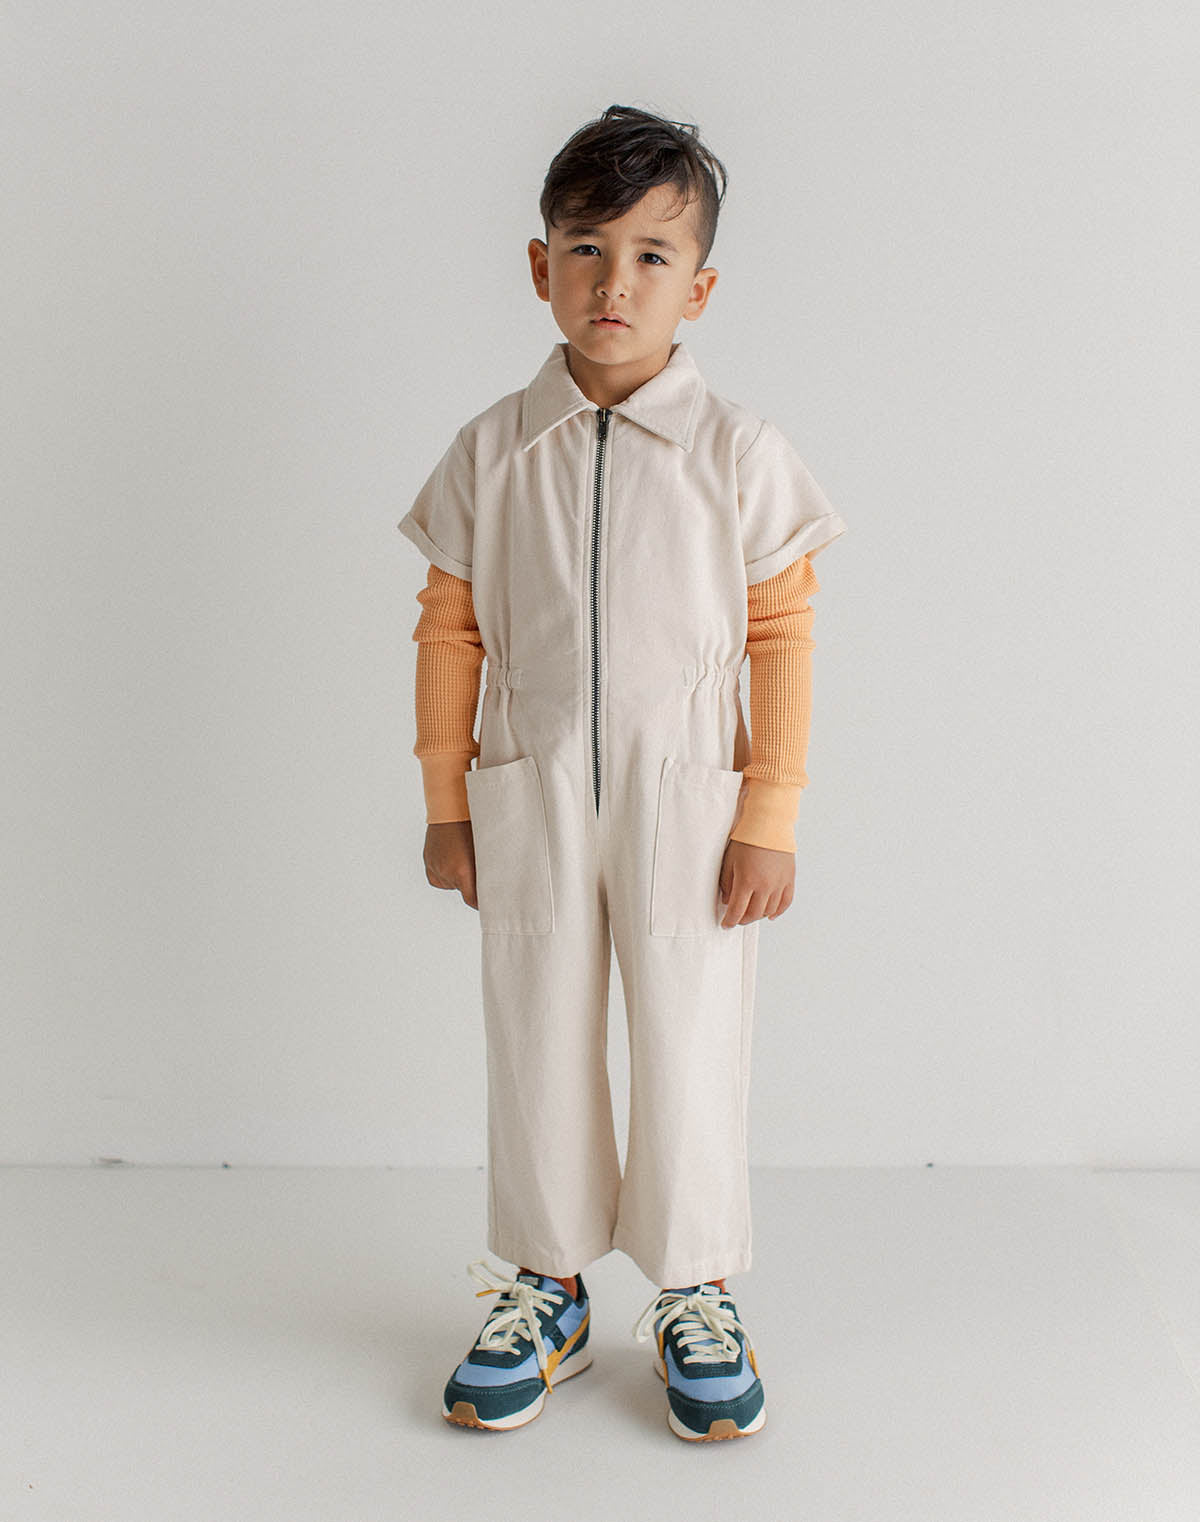 Image of Noble Organic Utility Suit in Oat Milk